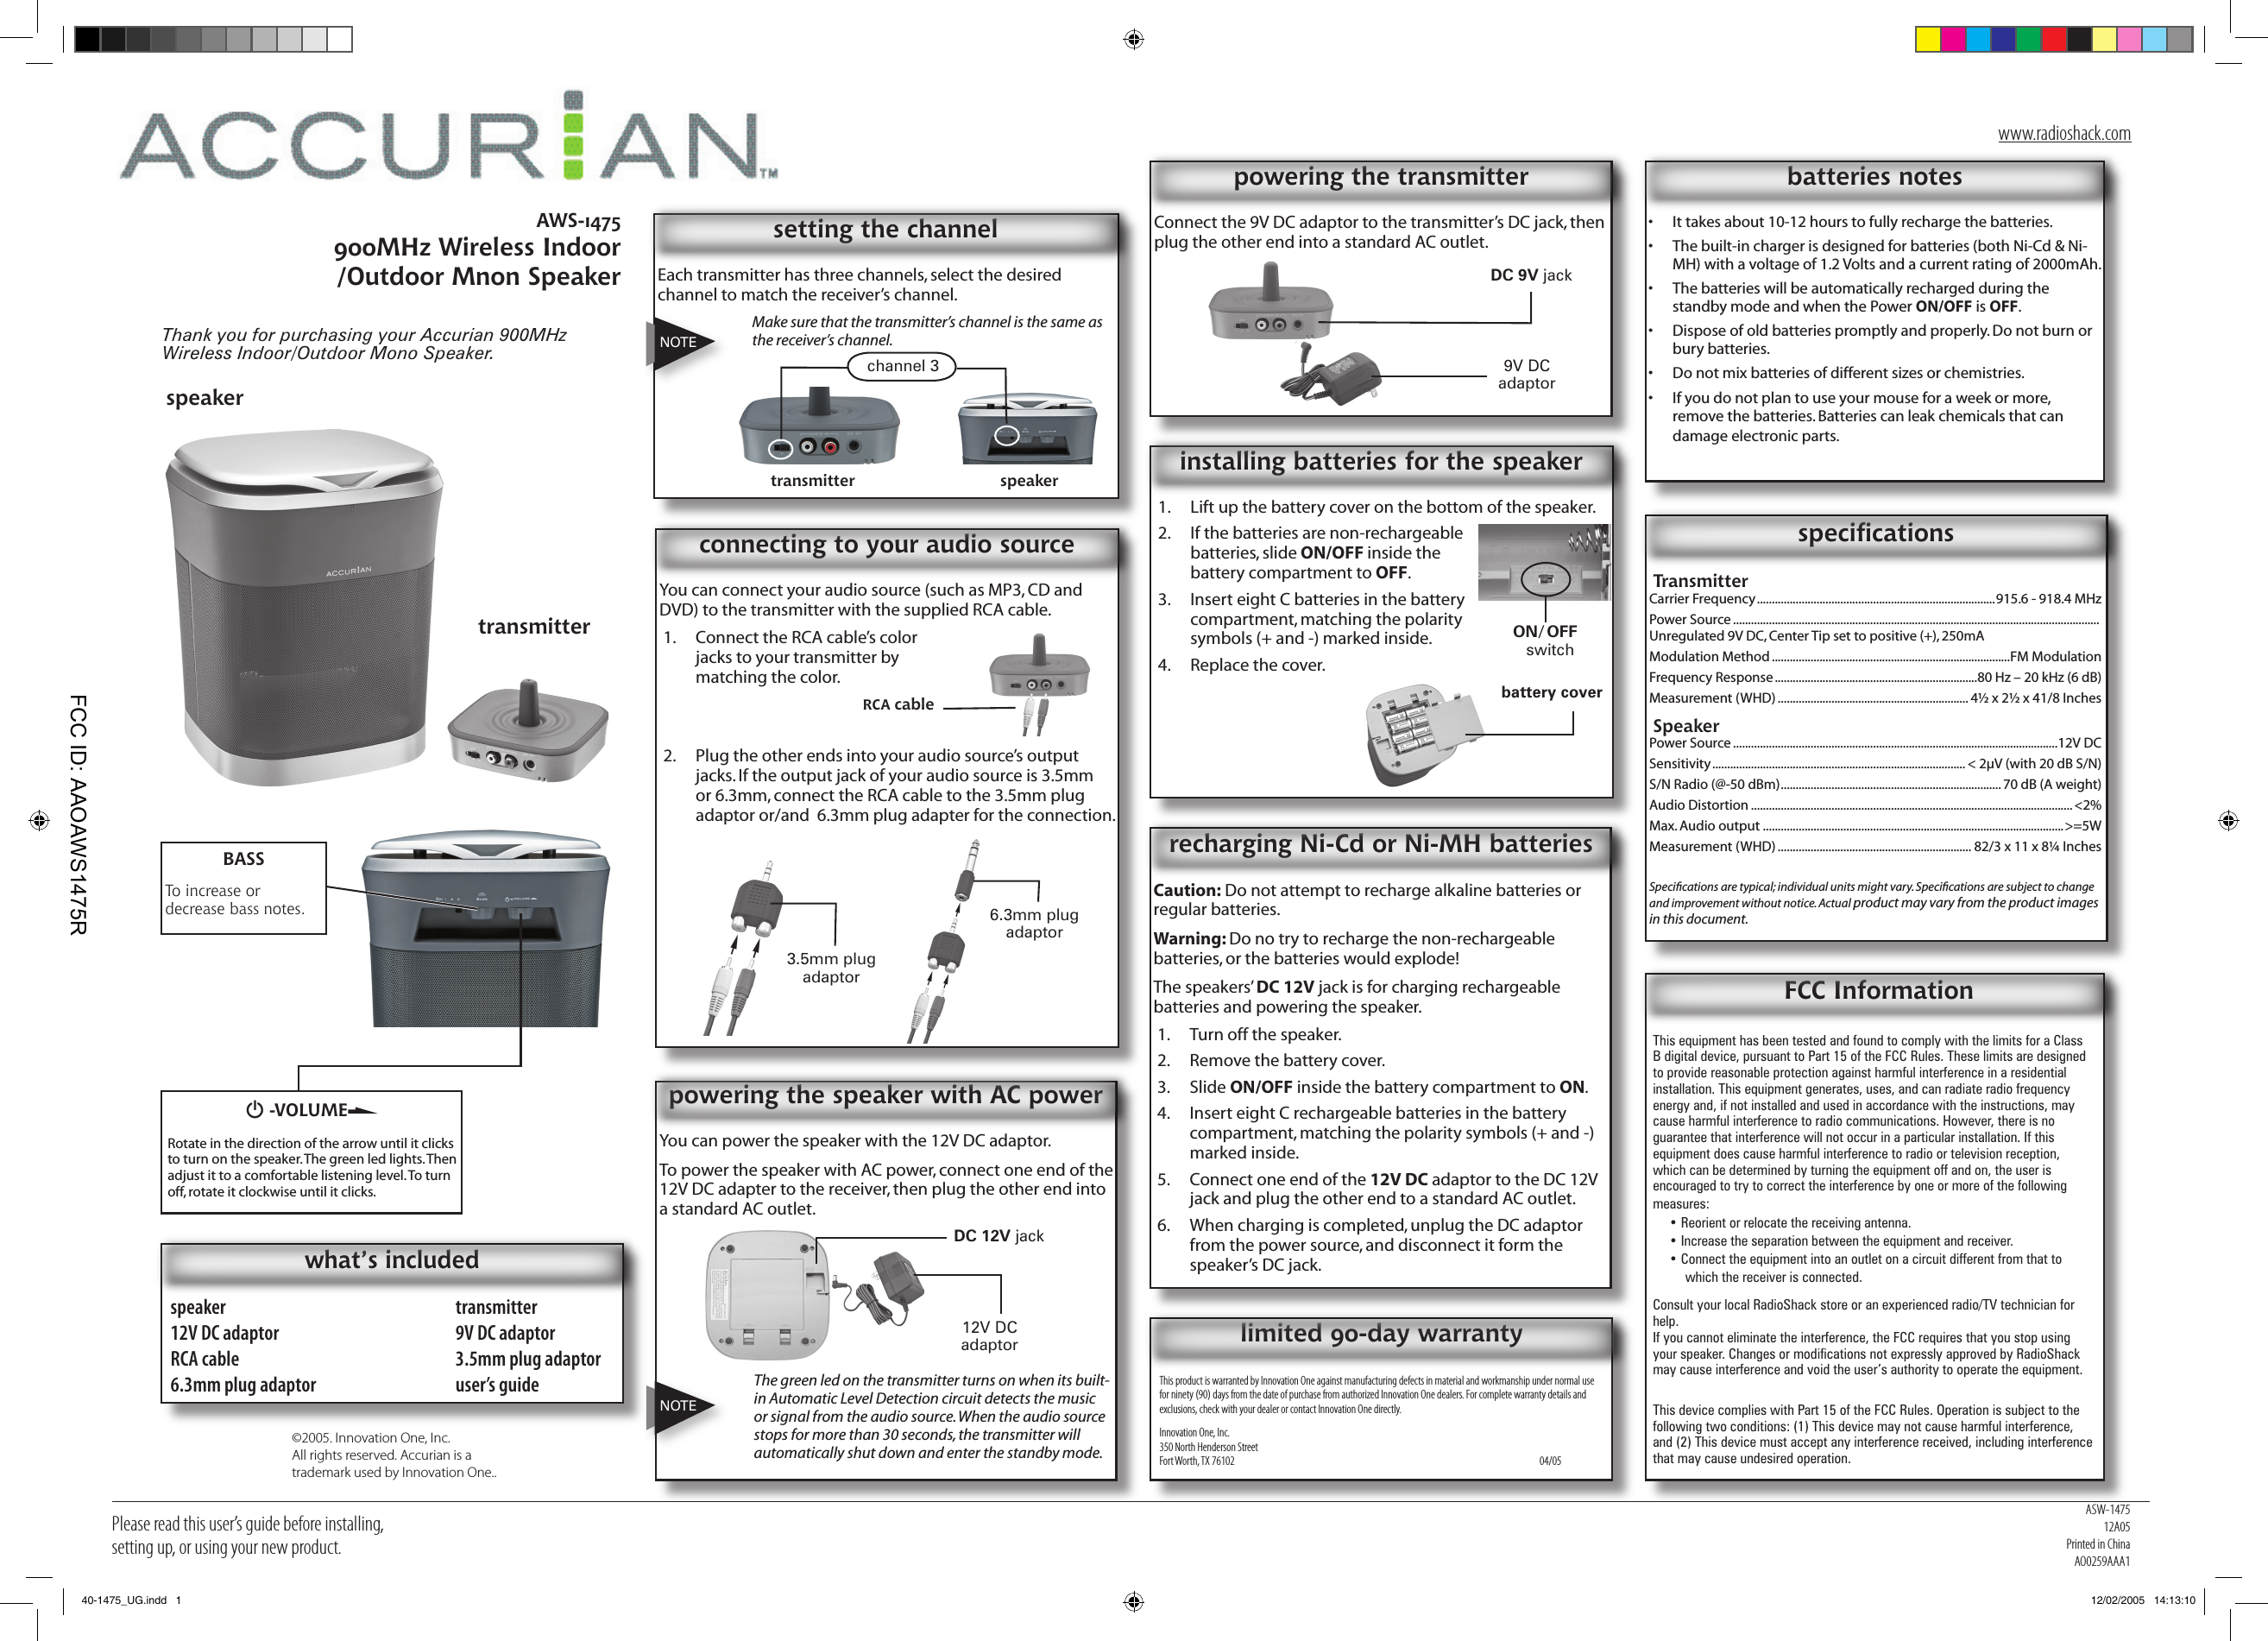 Please read this user’s guide before installing, setting up, or using your new product.AWS-1475900MHz Wireless Indoor /Outdoor Mnon SpeakerThank you for purchasing your Accurian 900MHz Wireless Indoor/Outdoor Mono Speaker. speaker  transmitter12V DC adaptor  9V DC adaptorRCA cable  3.5mm plug adaptor6.3mm plug adaptor  user’s guidewhat’s includedConnect the 9V DC adaptor to the transmitter’s DC jack, then plug the other end into a standard AC outlet.powering the transmitterEach transmitter has three channels, select the desired channel to match the receiver’s channel. Make sure that the transmitter’s channel is the same as the receiver’s channel.setting the channel FCC InformationThis equipment has been tested and found to comply with the limits for a Class B digital device, pursuant to Part 15 of the FCC Rules. These limits are designed to provide reasonable protection against harmful interference in a residential installation. This equipment generates, uses, and can radiate radio frequency energy and, if not installed and used in accordance with the instructions, may cause harmful interference to radio communications. However, there is no guarantee that interference will not occur in a particular installation. If this equipment does cause harmful interference to radio or television reception, which can be determined by turning the equipment off and on, the user is encouraged to try to correct the interference by one or more of the following measures:• Reorient or relocate the receiving antenna.• Increase the separation between the equipment and receiver. • Connect the equipment into an outlet on a circuit different from that to which the receiver is connected. Consult your local RadioShack store or an experienced radio/TV technician for help.If you cannot eliminate the interference, the FCC requires that you stop using your speaker. Changes or modiﬁcations not expressly approved by RadioShack may cause interference and void the user’s authority to operate the equipment.This device complies with Part 15 of the FCC Rules. Operation is subject to the following two conditions: (1) This device may not cause harmful interference, and (2) This device must accept any interference received, including interference that may cause undesired operation.speakertransmitterG -VOLUMERotate in the direction of the arrow until it clicks to turn on the speaker. The green led lights. Then adjust it to a comfortable listening level. To turn off, rotate it clockwise until it clicks.BASSTo increase or decrease bass notes.TransmitterCarrier Frequency ................................................................................915.6 - 918.4 MHzPower Source ...........................................................................................................................  Unregulated 9V DC, Center Tip set to positive (+), 250mAModulation Method ................................................................................FM ModulationFrequency Response ....................................................................80 Hz – 20 kHz (6 dB)Measurement (WHD) ................................................................ 4½ x 2½ x 41/8 InchesSpeakerPower Source .............................................................................................................12V DCSensitivity ..................................................................................... &lt; 2µV (with 20 dB S/N)S/N Radio (@-50 dBm) .......................................................................... 70 dB (A weight)Audio Distortion ............................................................................................................ &lt;2%Max. Audio output .....................................................................................................&gt;=5WMeasurement (WHD) ................................................................. 82/3 x 11 x 8¼ InchesSpeciﬁcations are typical; individual units might vary. Speciﬁcations are subject to change and improvement without notice. Actual product may vary from the product images in this document.speciﬁcationsNOTEchannel 3 9V DC adaptorDC 9V jackCaution: Do not attempt to recharge alkaline batteries or regular batteries. Warning: Do no try to recharge the non-rechargeable batteries, or the batteries would explode!The speakers’ DC 12V jack is for charging rechargeable batteries and powering the speaker.1.  Turn off the speaker.2.  Remove the battery cover.3.  Slide ON/OFF inside the battery compartment to ON. 4.  Insert eight C rechargeable batteries in the battery compartment, matching the polarity symbols (+ and -) marked inside.5.  Connect one end of the 12V DC adaptor to the DC 12V jack and plug the other end to a standard AC outlet.6.  When charging is completed, unplug the DC adaptor from the power source, and disconnect it form the speaker’s DC jack.recharging Ni-Cd or Ni-MH batteriestransmitter speakerYou can connect your audio source (such as MP3, CD and DVD) to the transmitter with the supplied RCA cable.1.  Connect the RCA cable’s color jacks to your transmitter by matching the color.2.  Plug the other ends into your audio source’s output jacks. If the output jack of your audio source is 3.5mm or 6.3mm, connect the RCA cable to the 3.5mm plug adaptor or/and  6.3mm plug adapter for the connection.connecting to y0ur audio sourceYou can power the speaker with the 12V DC adaptor.To power the speaker with AC power, connect one end of the 12V DC adapter to the receiver, then plug the other end into a standard AC outlet.The green led on the transmitter turns on when its built-in Automatic Level Detection circuit detects the music or signal from the audio source. When the audio source stops for more than 30 seconds, the transmitter will automatically shut down and enter the standby mode.powering the speaker with AC power1.  Lift up the battery cover on the bottom of the speaker.2.  If the batteries are non-rechargeable batteries, slide ON/OFF inside the battery compartment to OFF. 3.  Insert eight C batteries in the battery compartment, matching the polarity symbols (+ and -) marked inside.4.  Replace the cover.installing batteries for the speaker•  It takes about 10-12 hours to fully recharge the batteries.•  The built-in charger is designed for batteries (both Ni-Cd &amp; Ni-MH) with a voltage of 1.2 Volts and a current rating of 2000mAh.•  The batteries will be automatically recharged during the standby mode and when the Power ON/OFF is OFF.•  Dispose of old batteries promptly and properly. Do not burn or bury batteries.•  Do not mix batteries of different sizes or chemistries.•  If you do not plan to use your mouse for a week or more, remove the batteries. Batteries can leak chemicals that can damage electronic parts.batteries notesRCA cable3.5mm plug adaptor6.3mm plug adaptor12V DC adaptorDC 12V jackON/OFF switchbattery coverThis product is warranted by Innovation One against manufacturing defects in material and workmanship under normal use for ninety (90) days from the date of purchase from authorized Innovation One dealers. For complete warranty details and exclusions, check with your dealer or contact Innovation One directly.Innovation One, Inc. 350 North Henderson Street Fort Worth, TX 76102          04/05limited 90-day warrantyNOTE©2005. Innovation One, Inc. All rights reserved. Accurian is a trademark used by Innovation One..ASW-147512A05Printed in ChinaAO0259AAA1www.radioshack.com40-1475_UG.indd   1 12/02/2005   14:13:10FCC ID: AAOAWS1475R